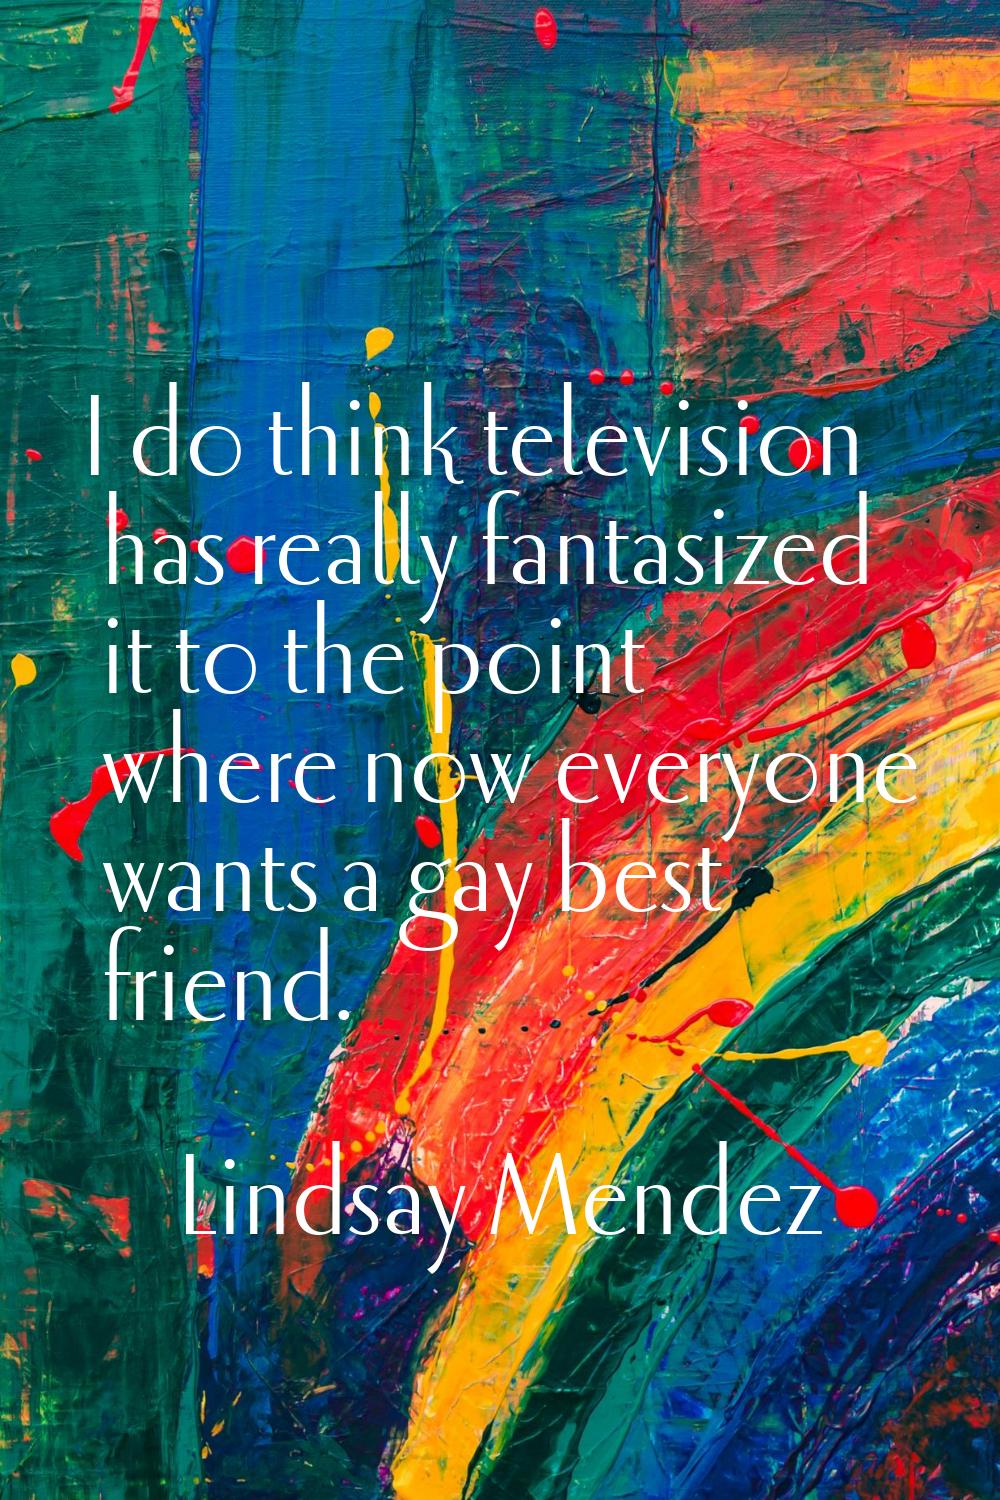 I do think television has really fantasized it to the point where now everyone wants a gay best fri